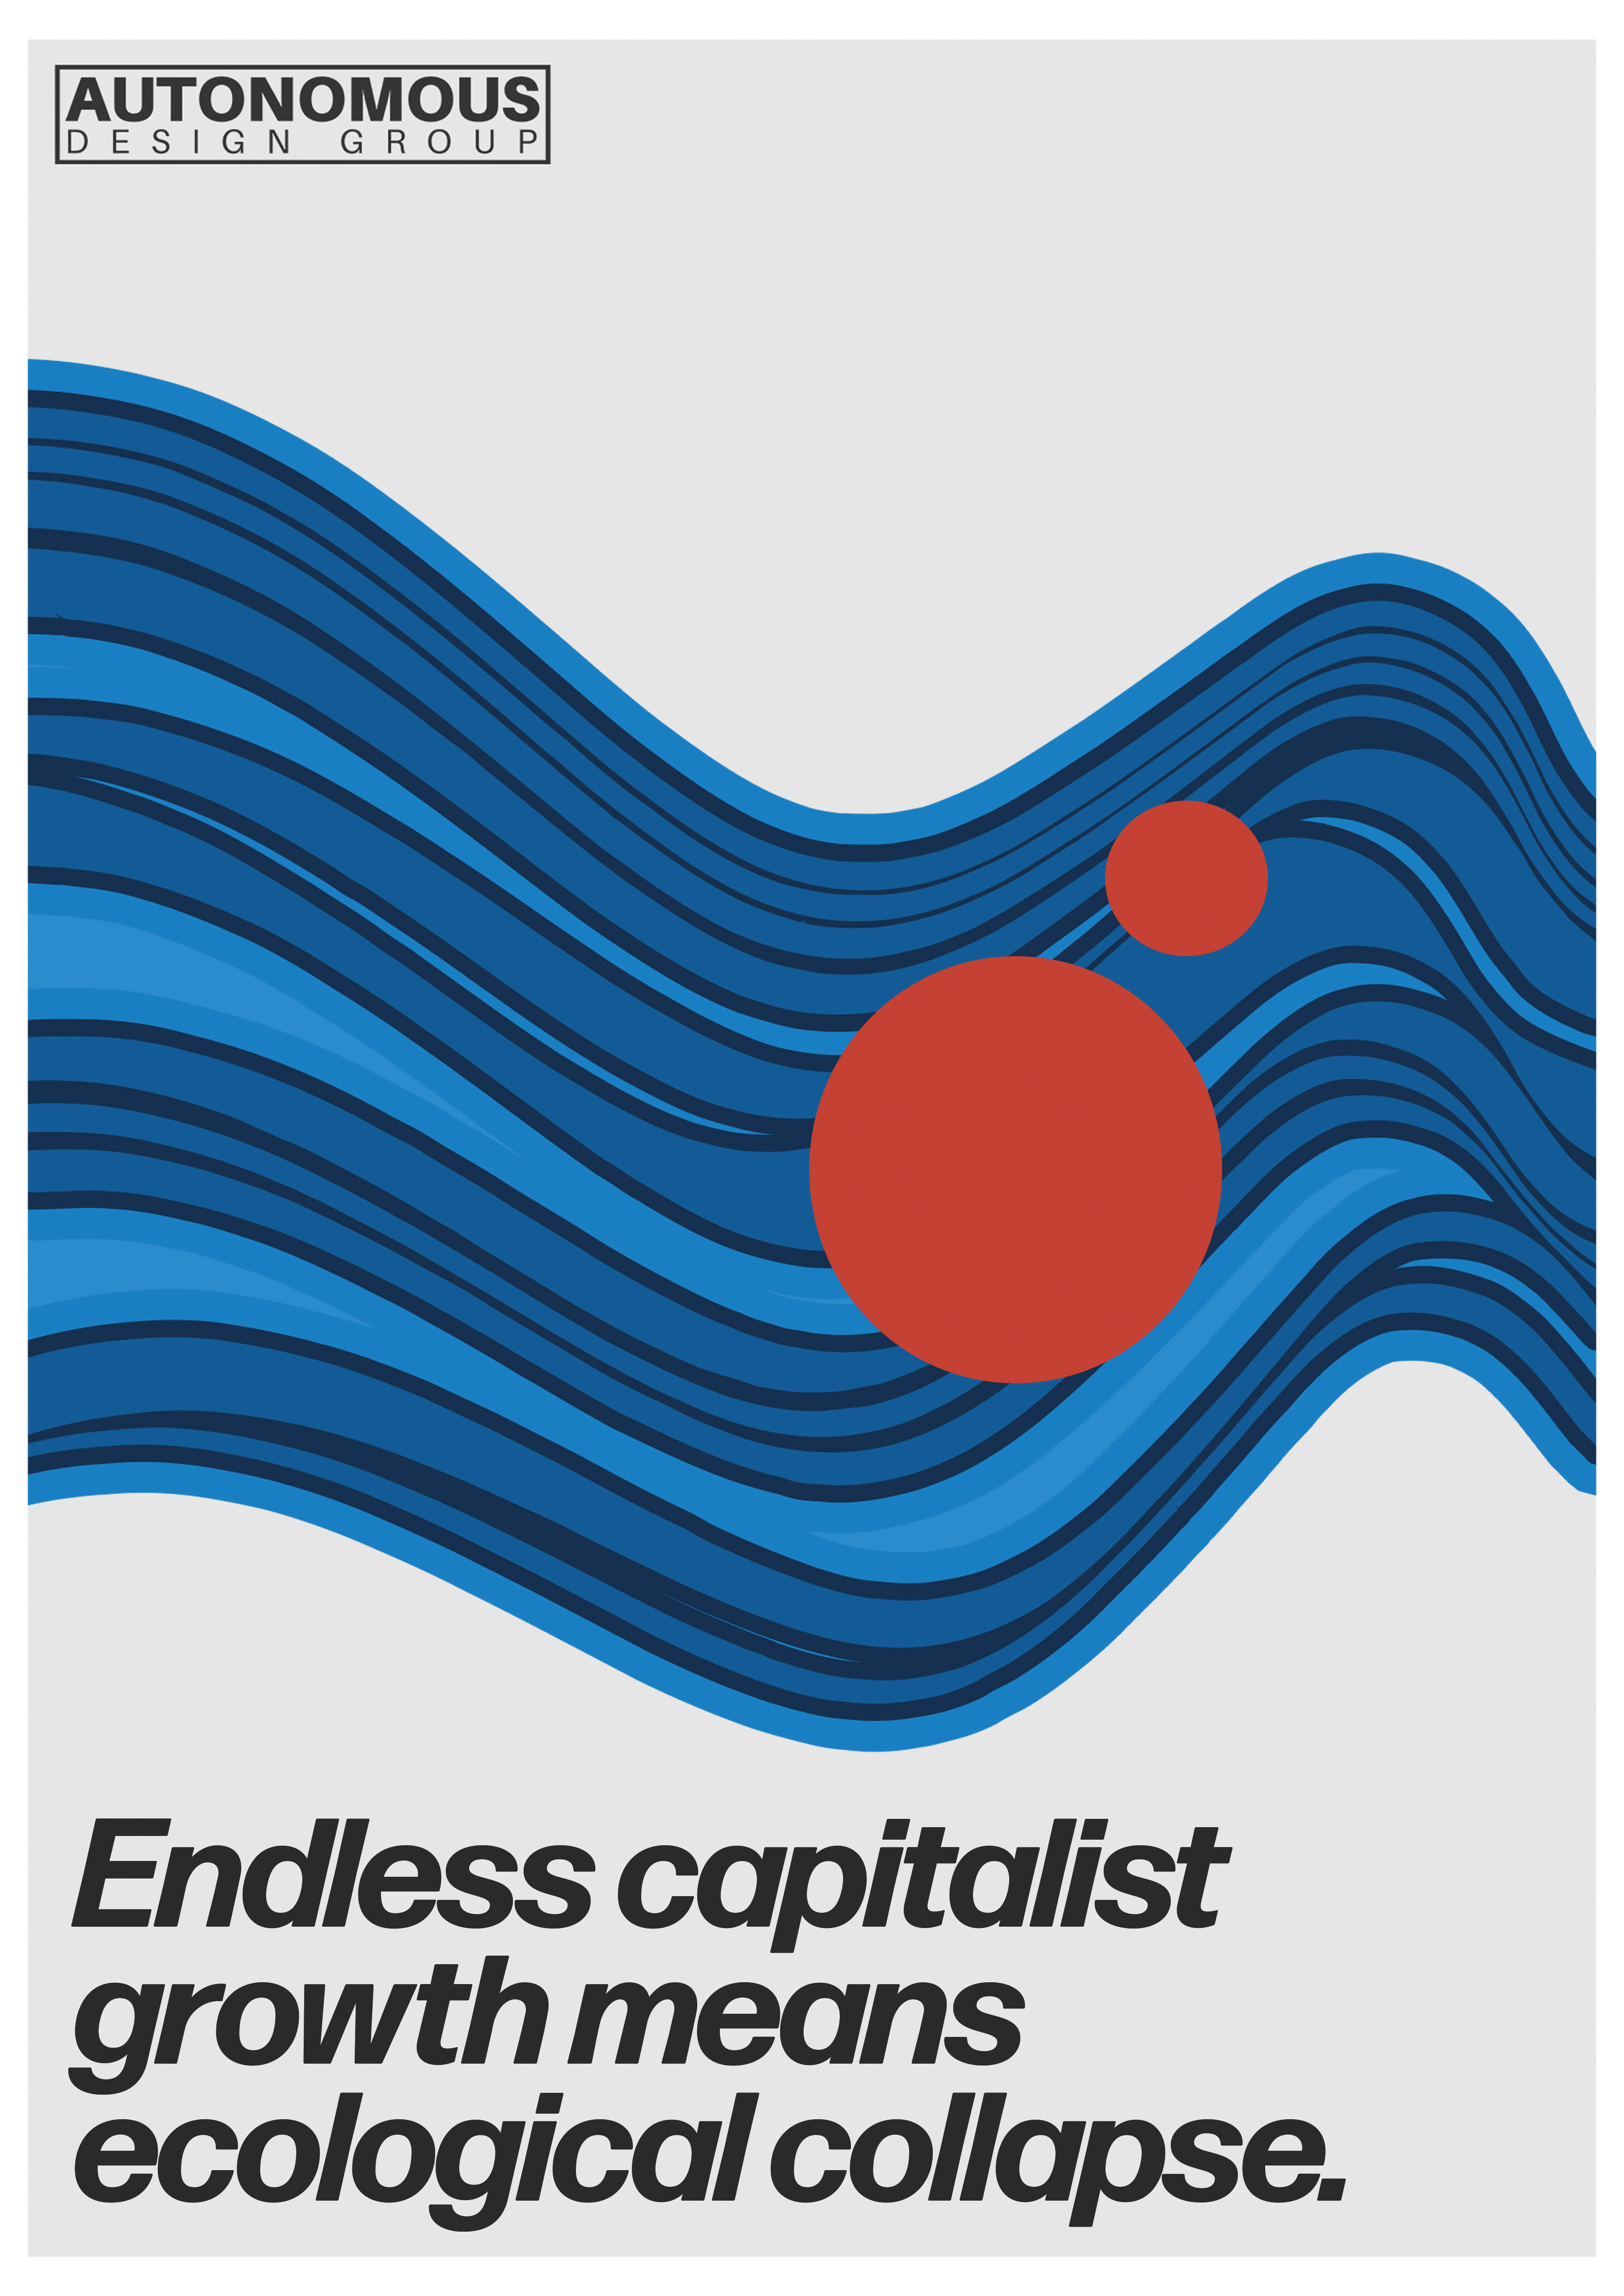 Endless capitalist growth means ecological collapse